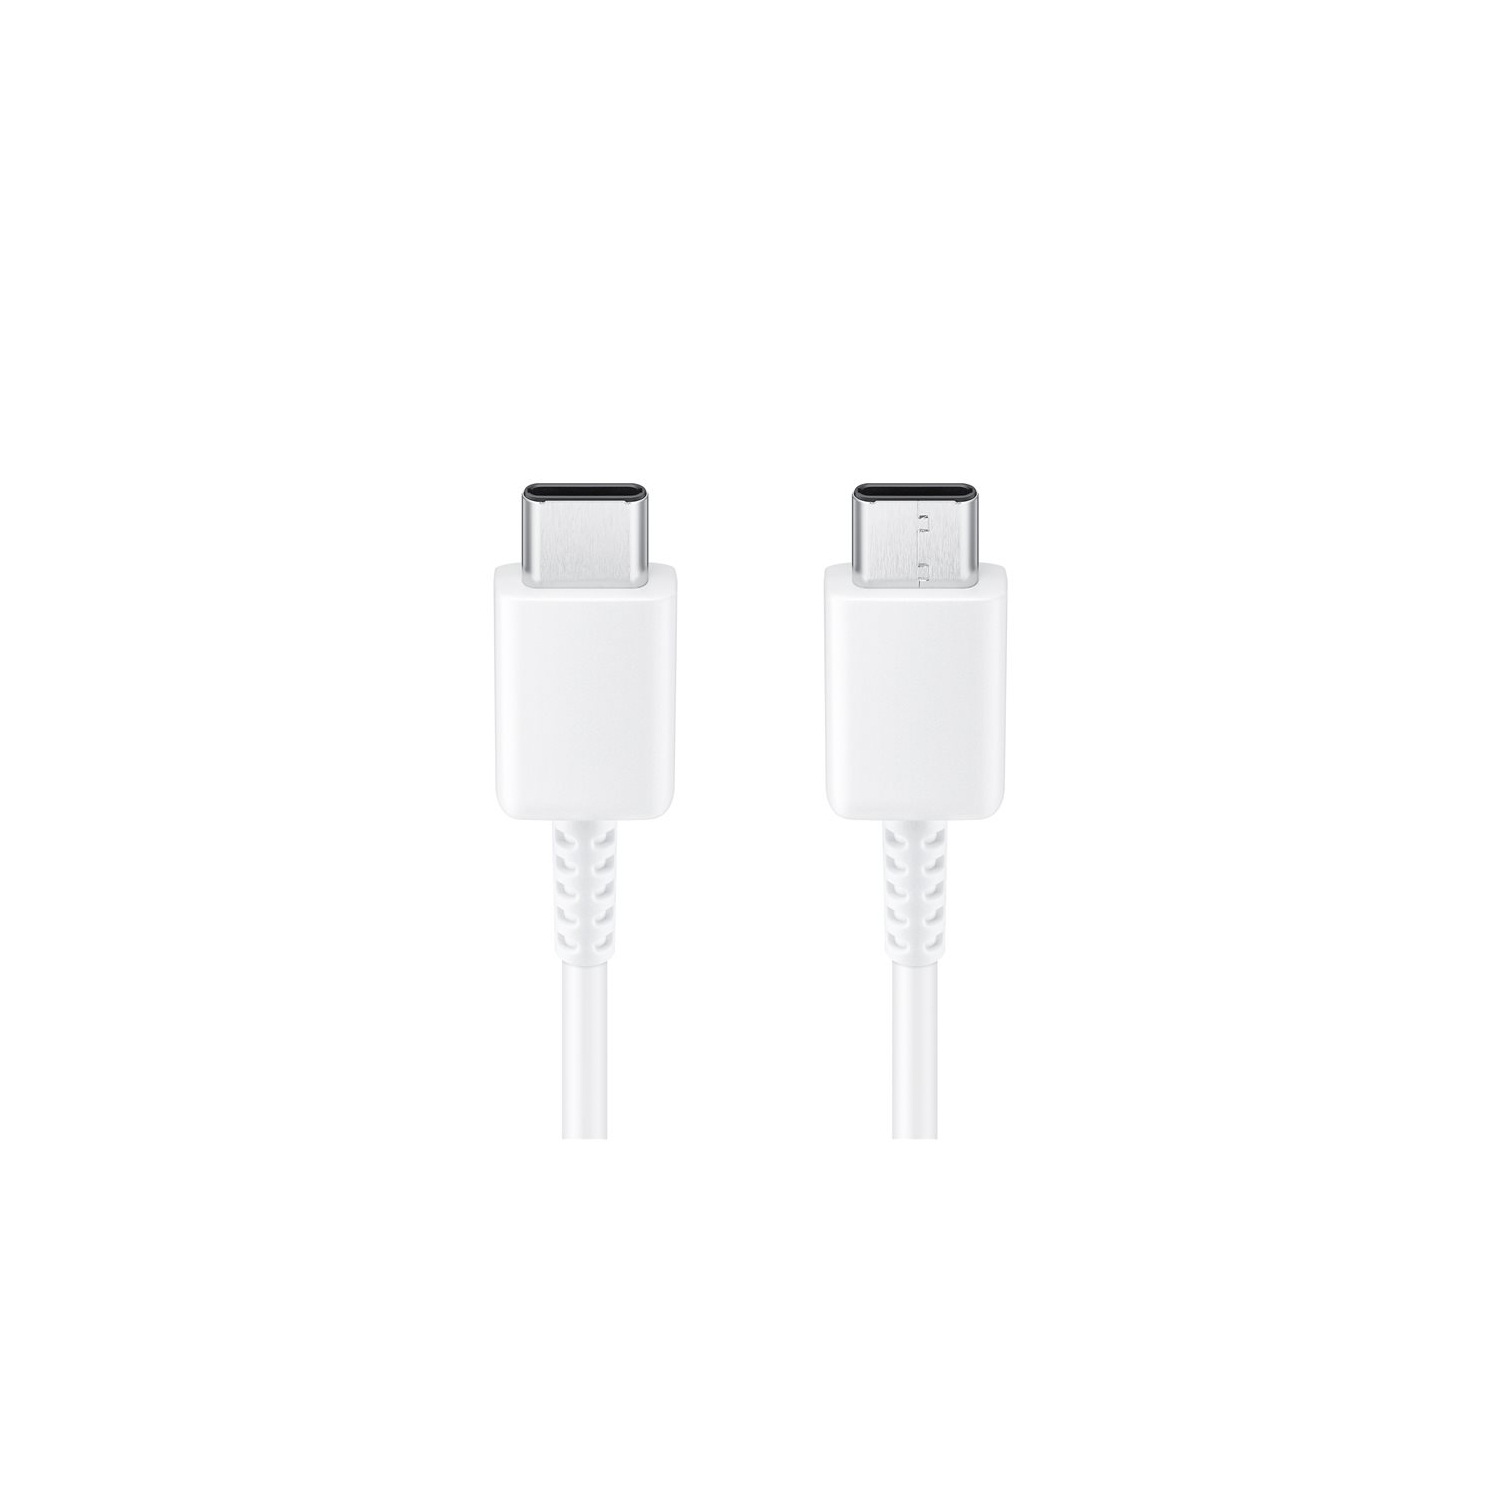 Samsung 3.3Ft USB-C to Type-C Fast Charging Cable Cord for Galaxy S10 S20 Note 9 10, Google Pixel, LG G7 G8, Moto G6 G7, White